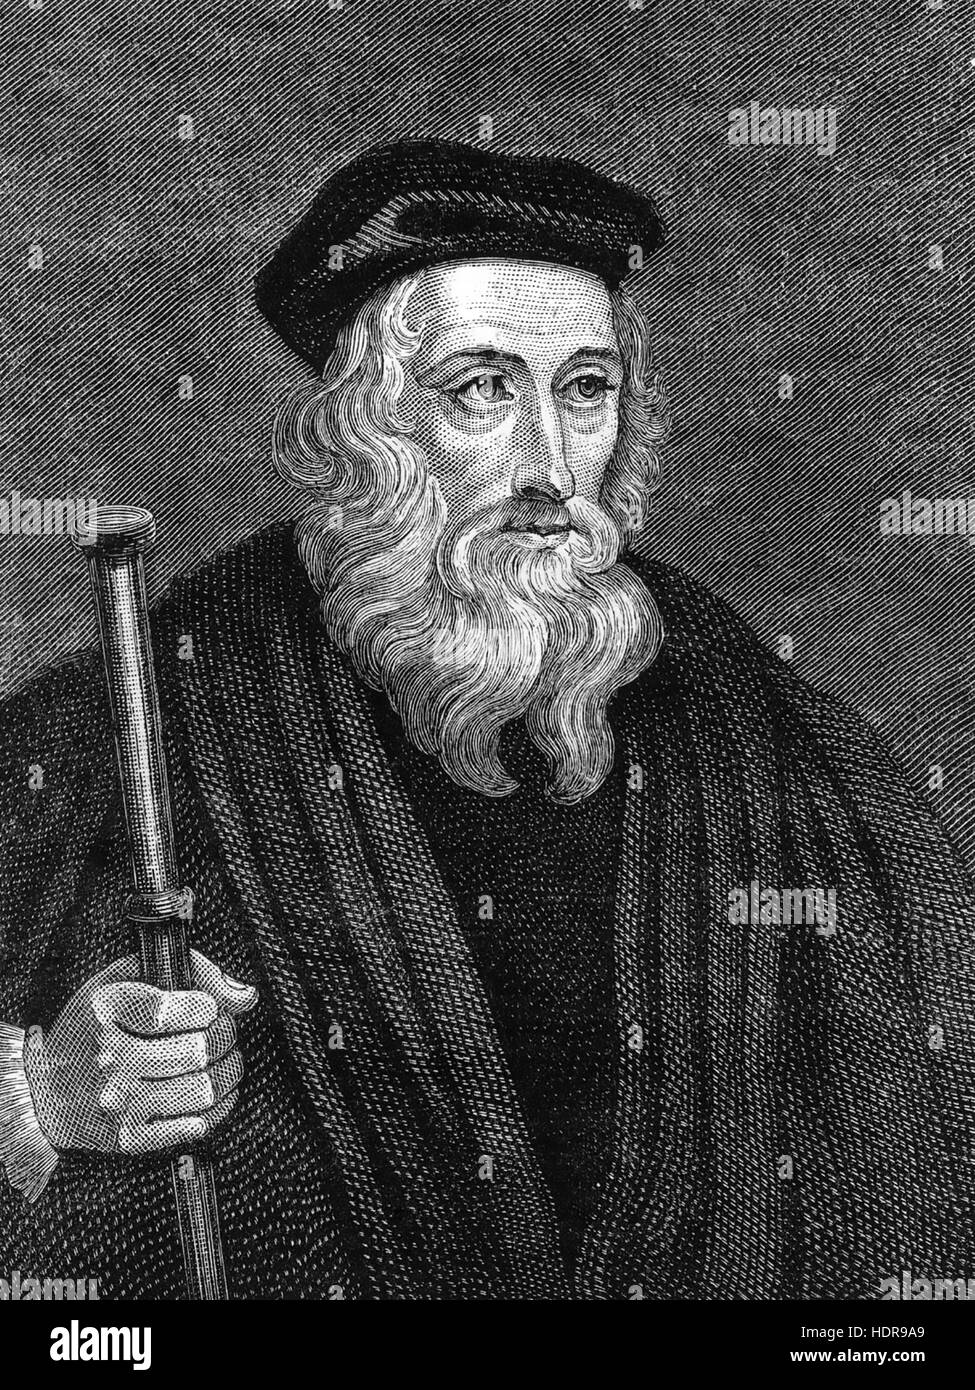 JOHN WYCLIFFE (c 1320-1384) English theologian and Bible translator in a 19th century engraving based on a 1388 engraving Stock Photo